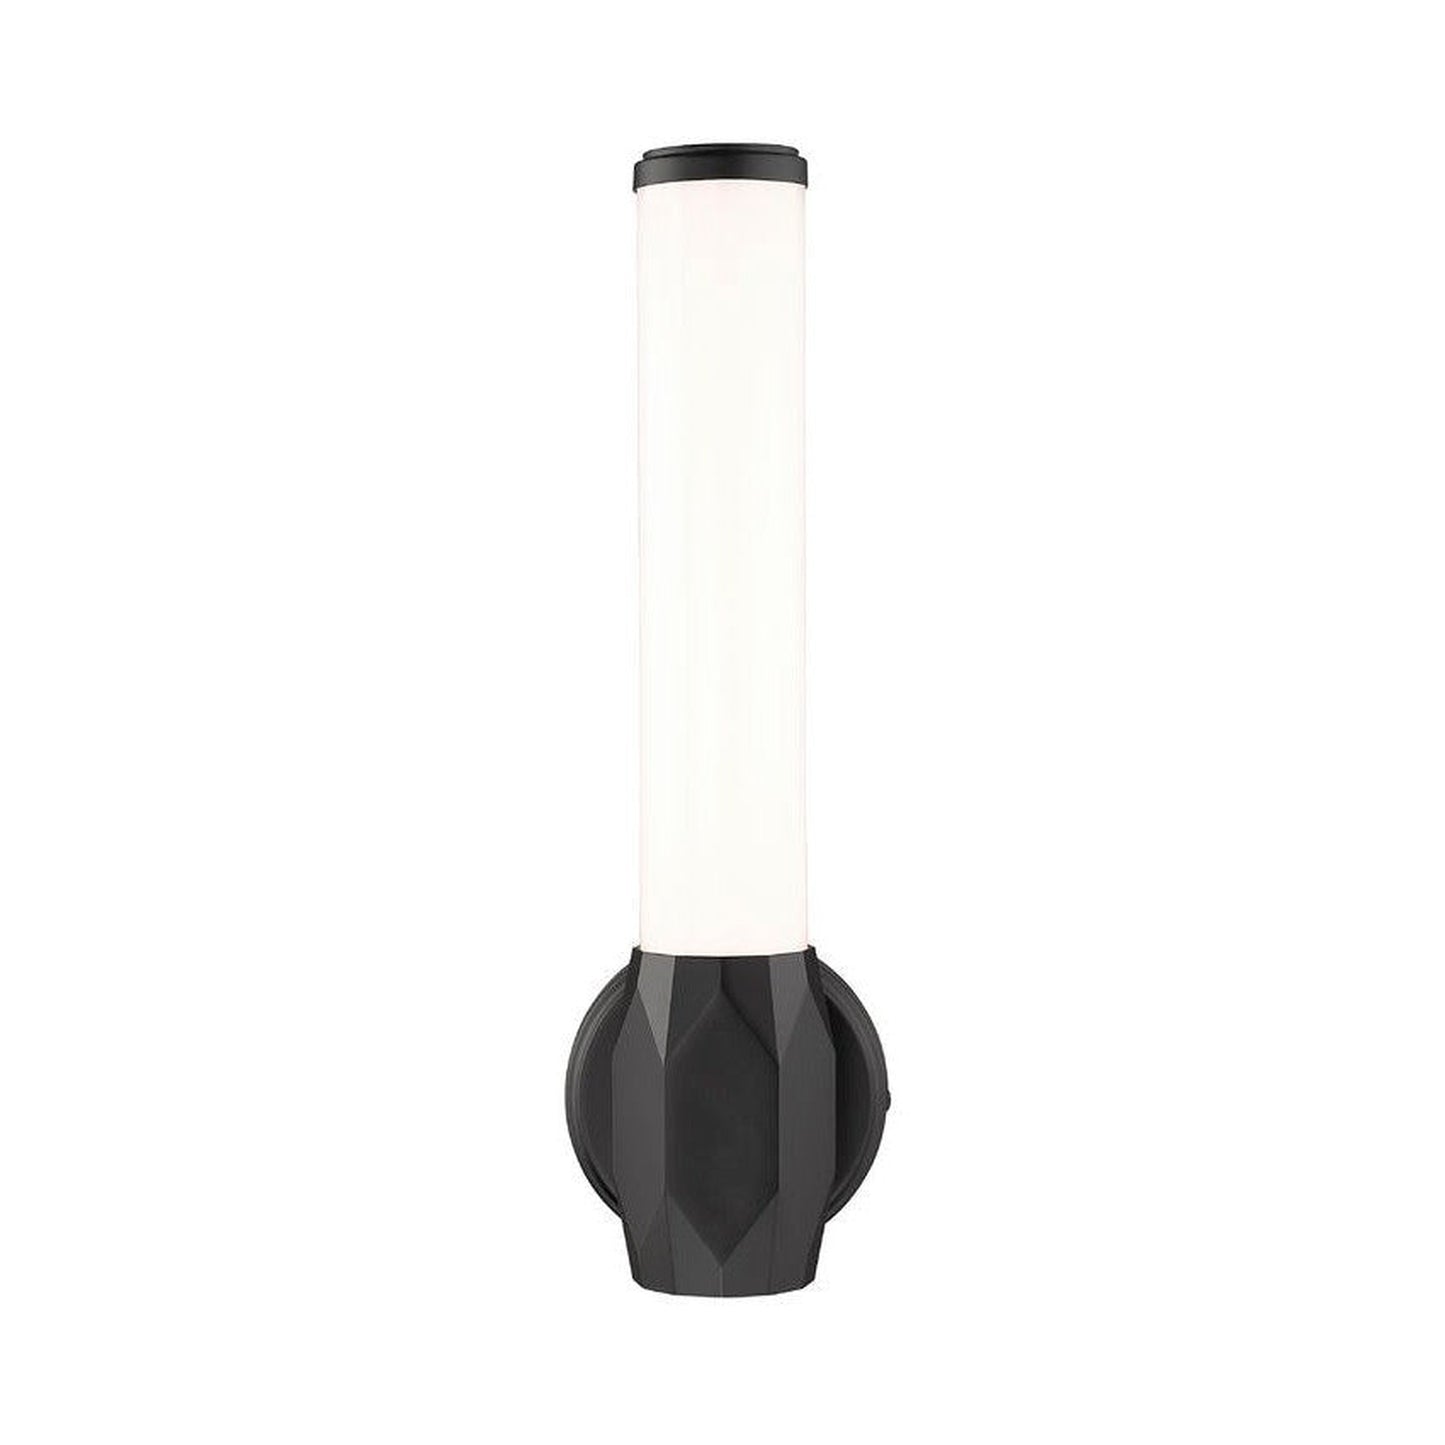 Z-Lite Cooper 5" 1-Light LED Matte Black and Frosted Shade Wall Sconce